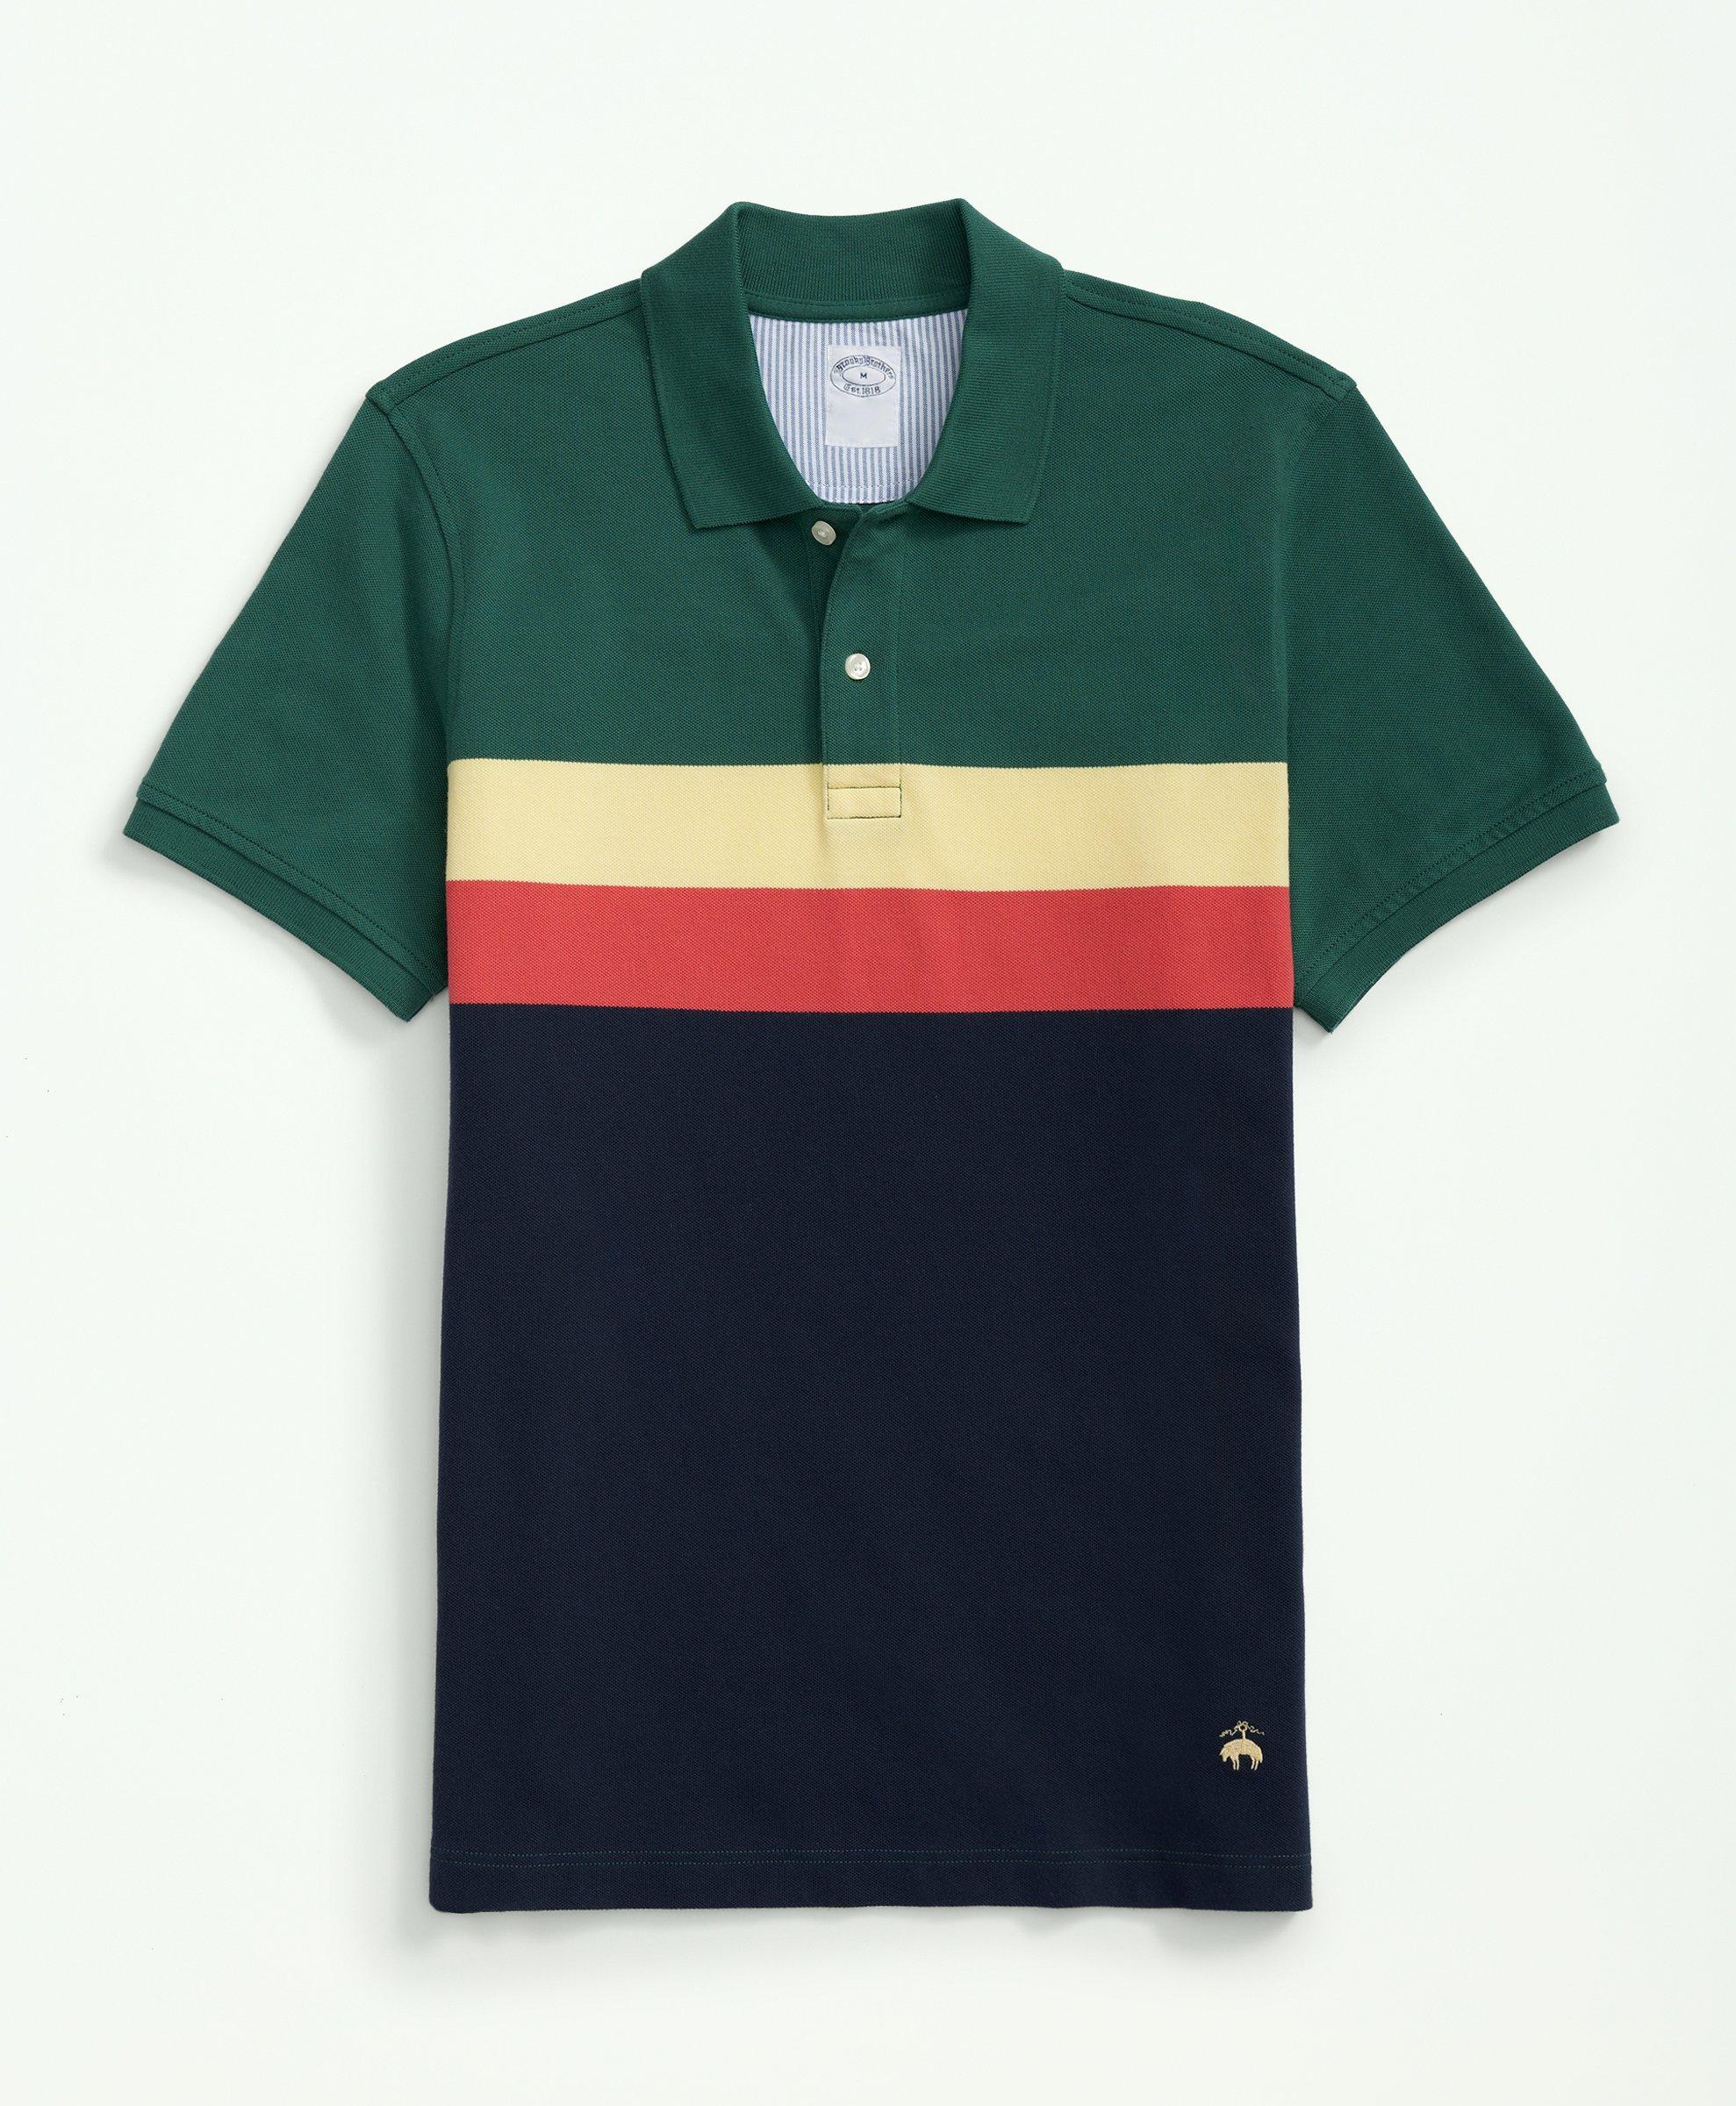 Polopalooza: The Best Looking Affordable Polos of 2018